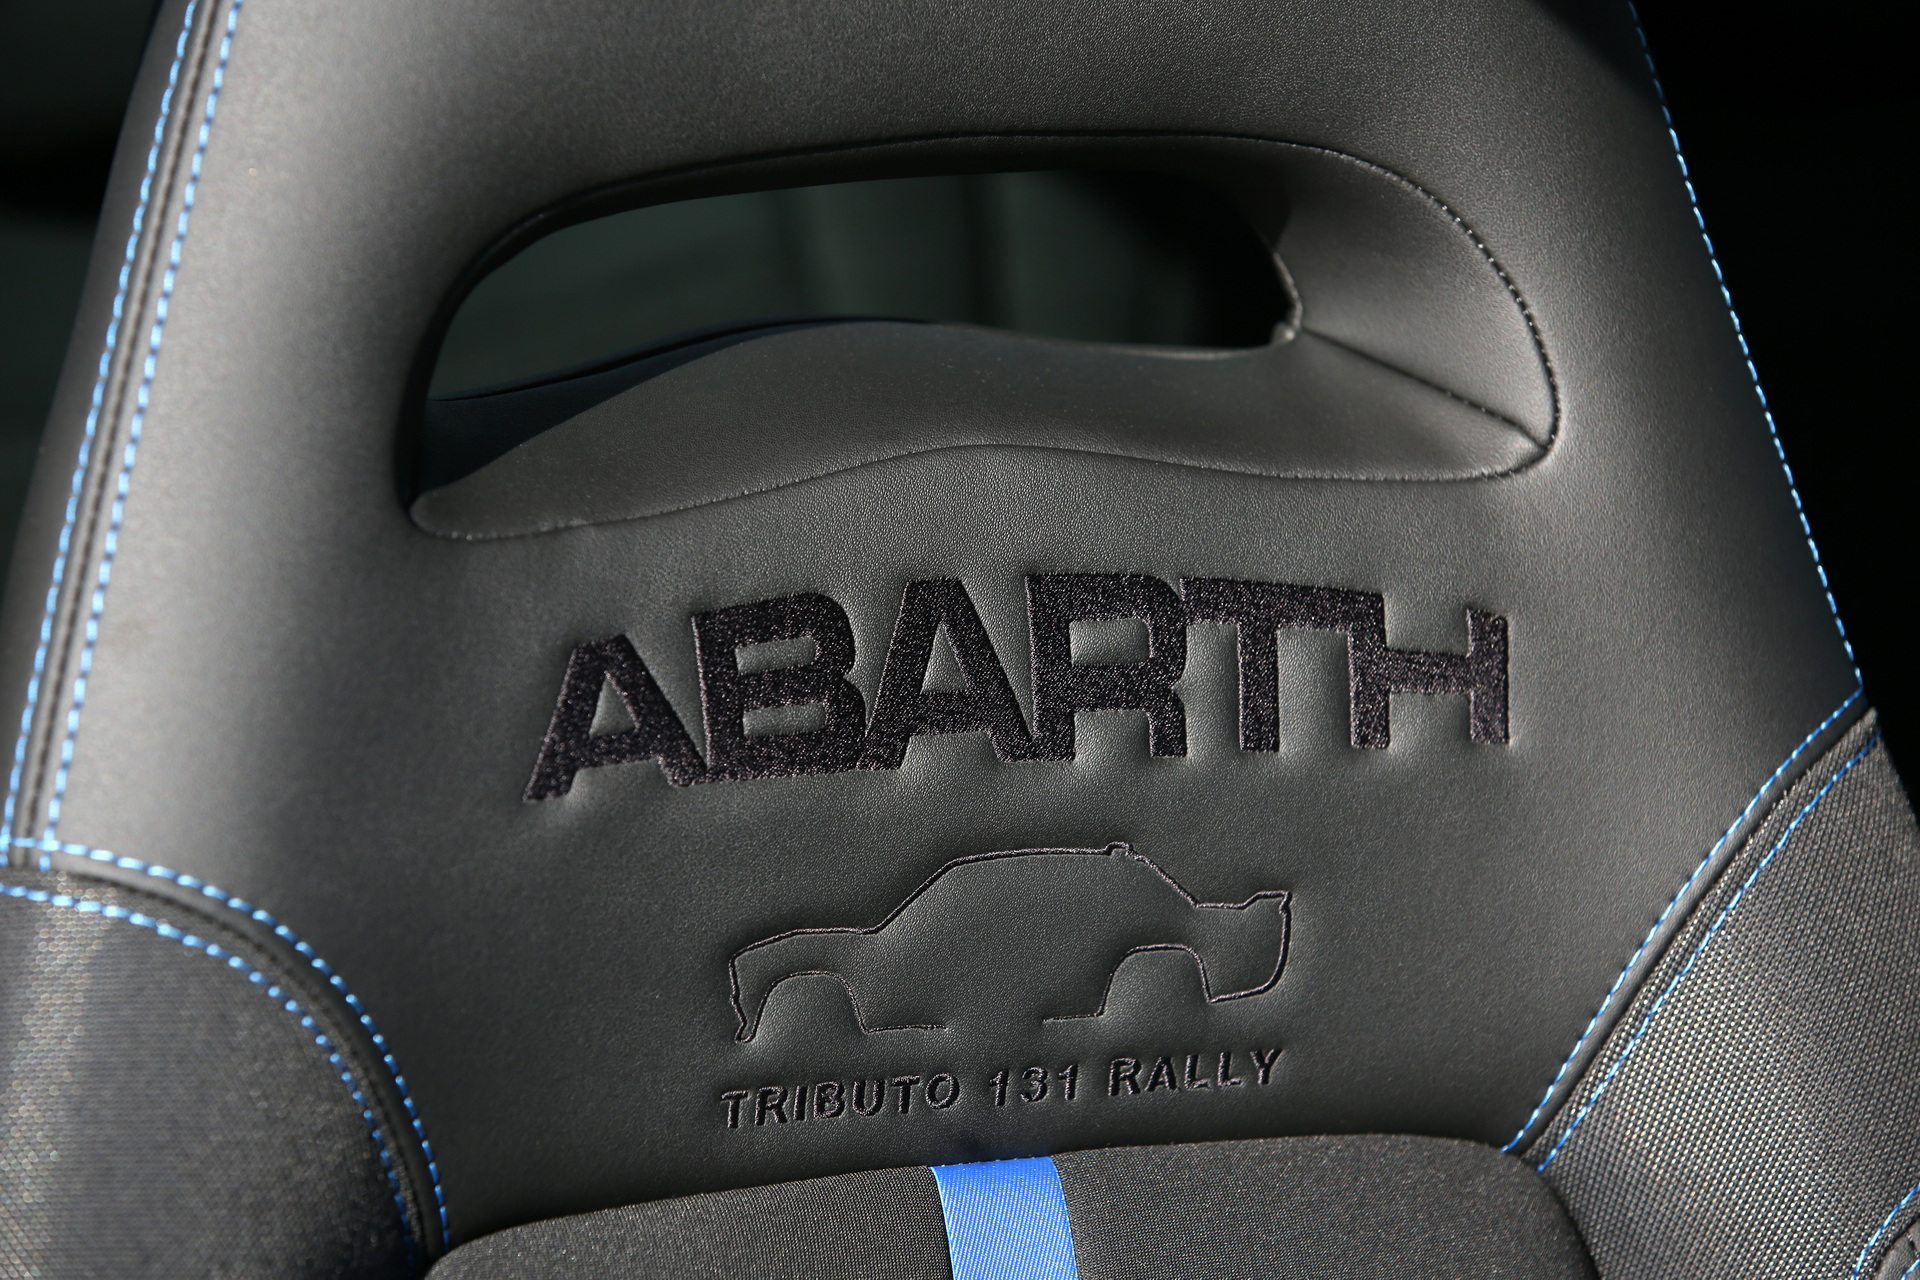 2022 Abarth 695 Tributo 131 Rally Interior Seats Wallpapers #33 of 34